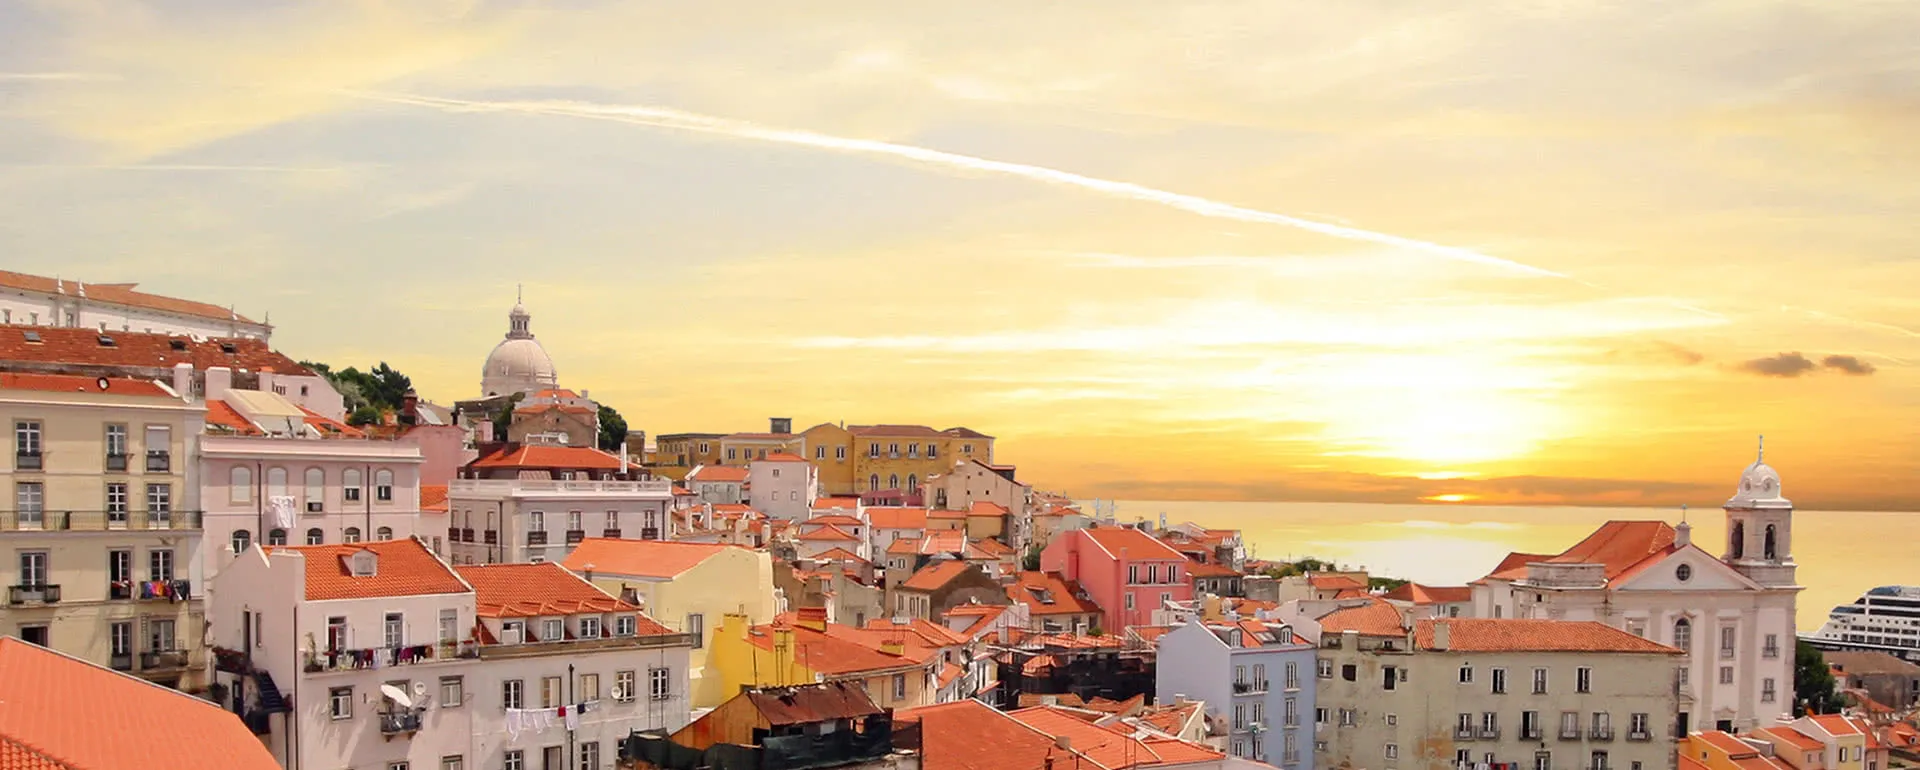 Lissabon - the destination with youth hostels